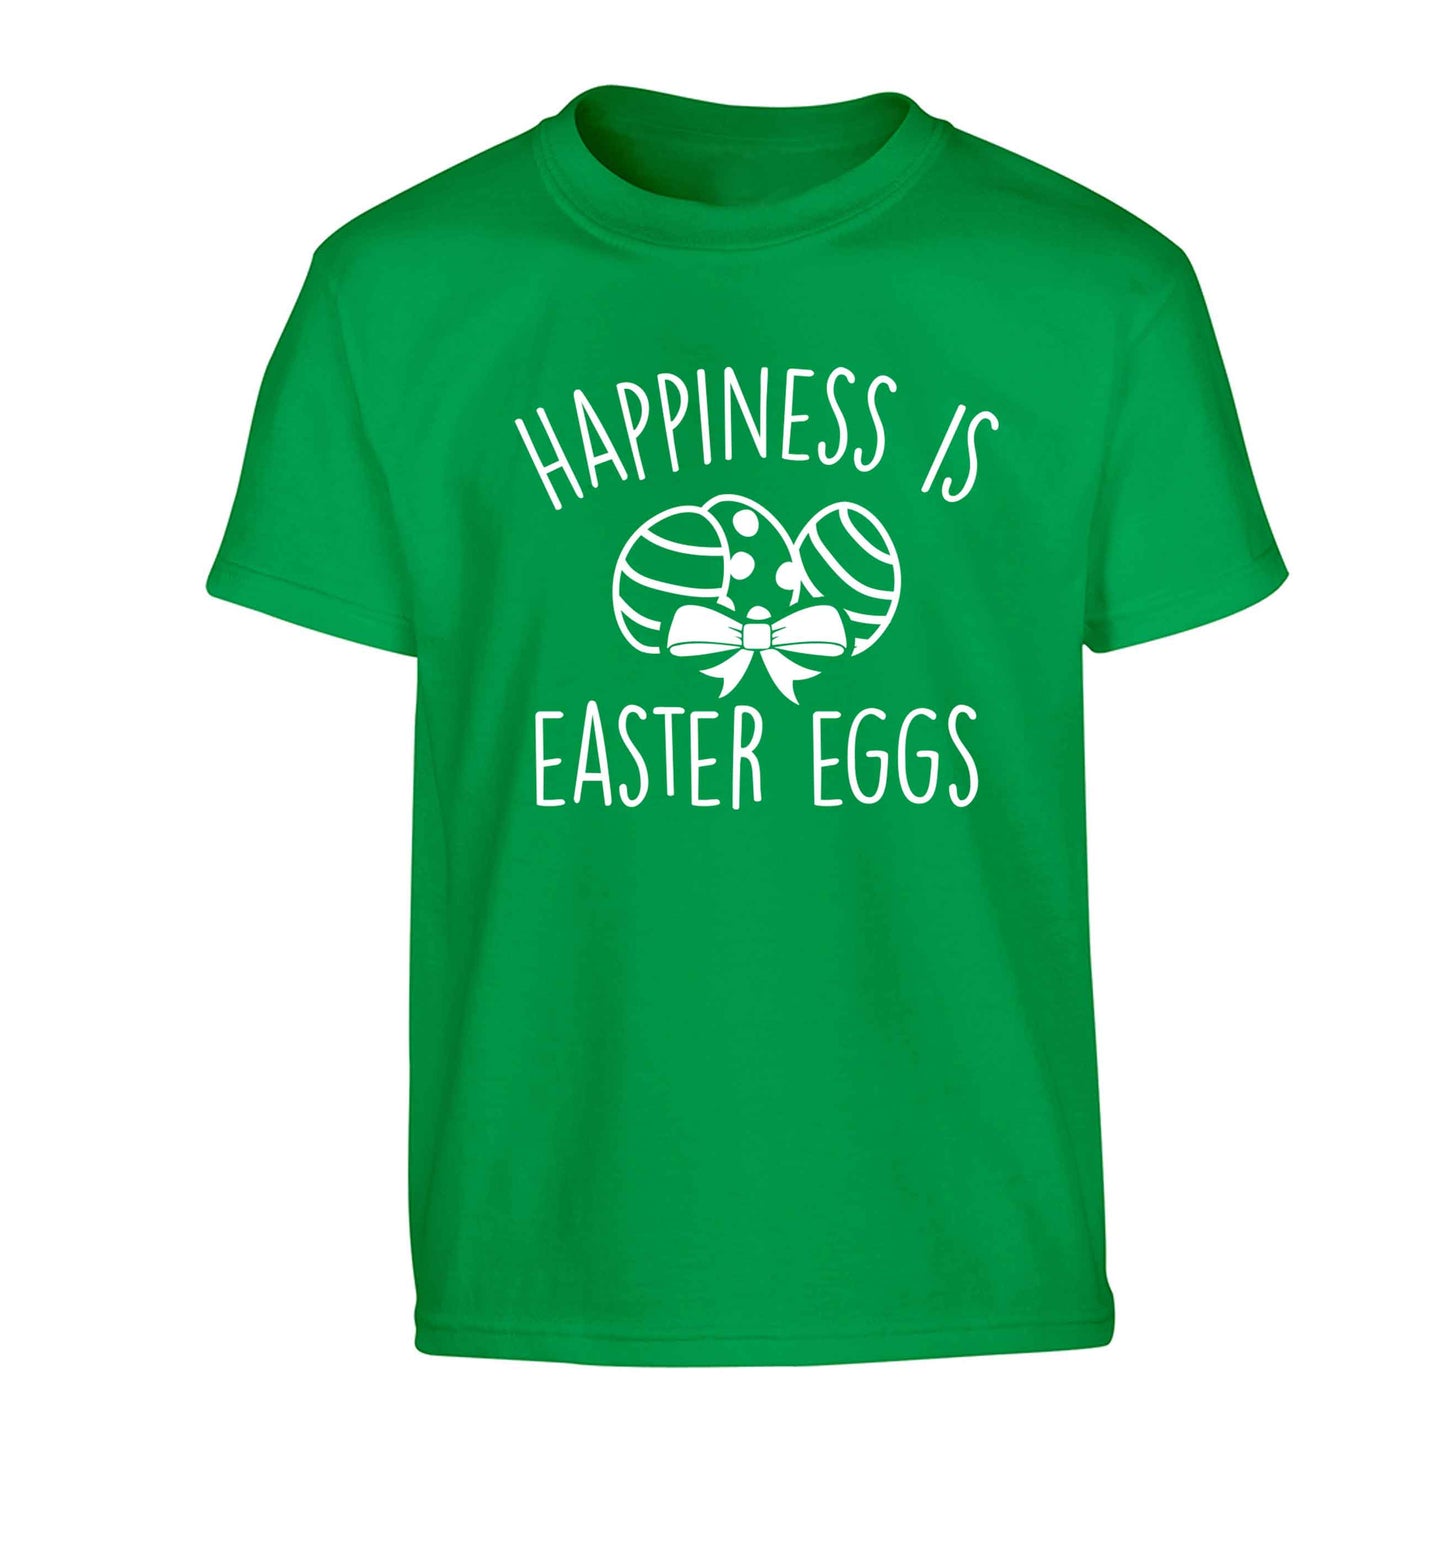 Happiness is Easter eggs Children's green Tshirt 12-13 Years